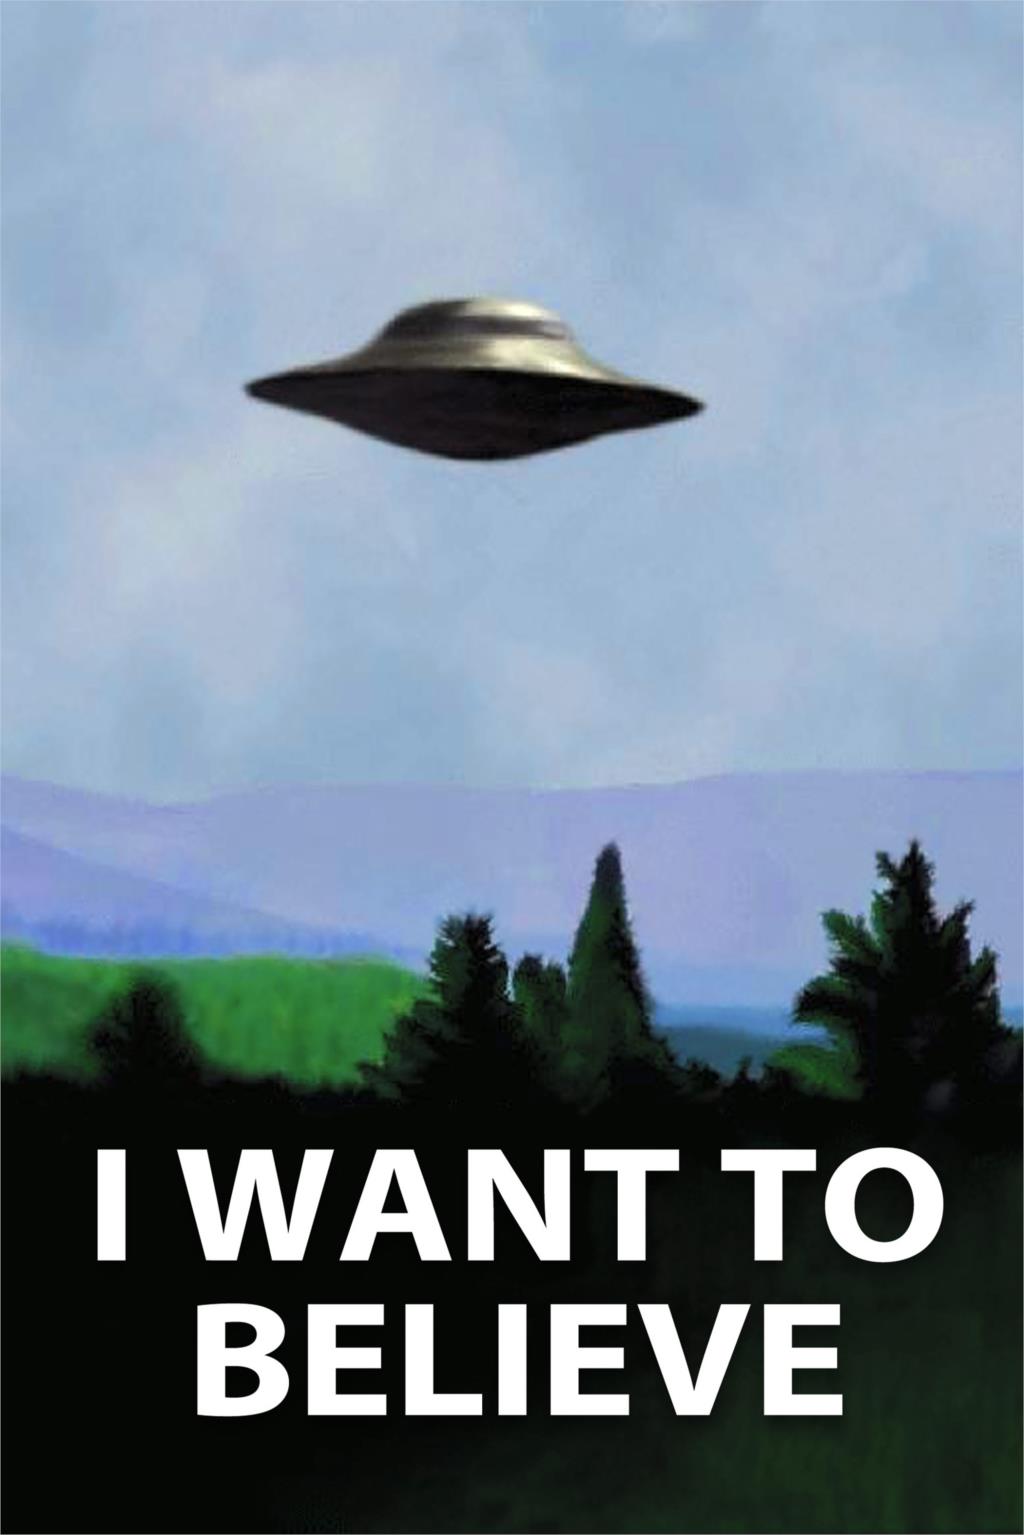 UFO-The-X-Files-I-Want-To-Believe-TV-Poster-Print-For-Home-Decoration.jpg